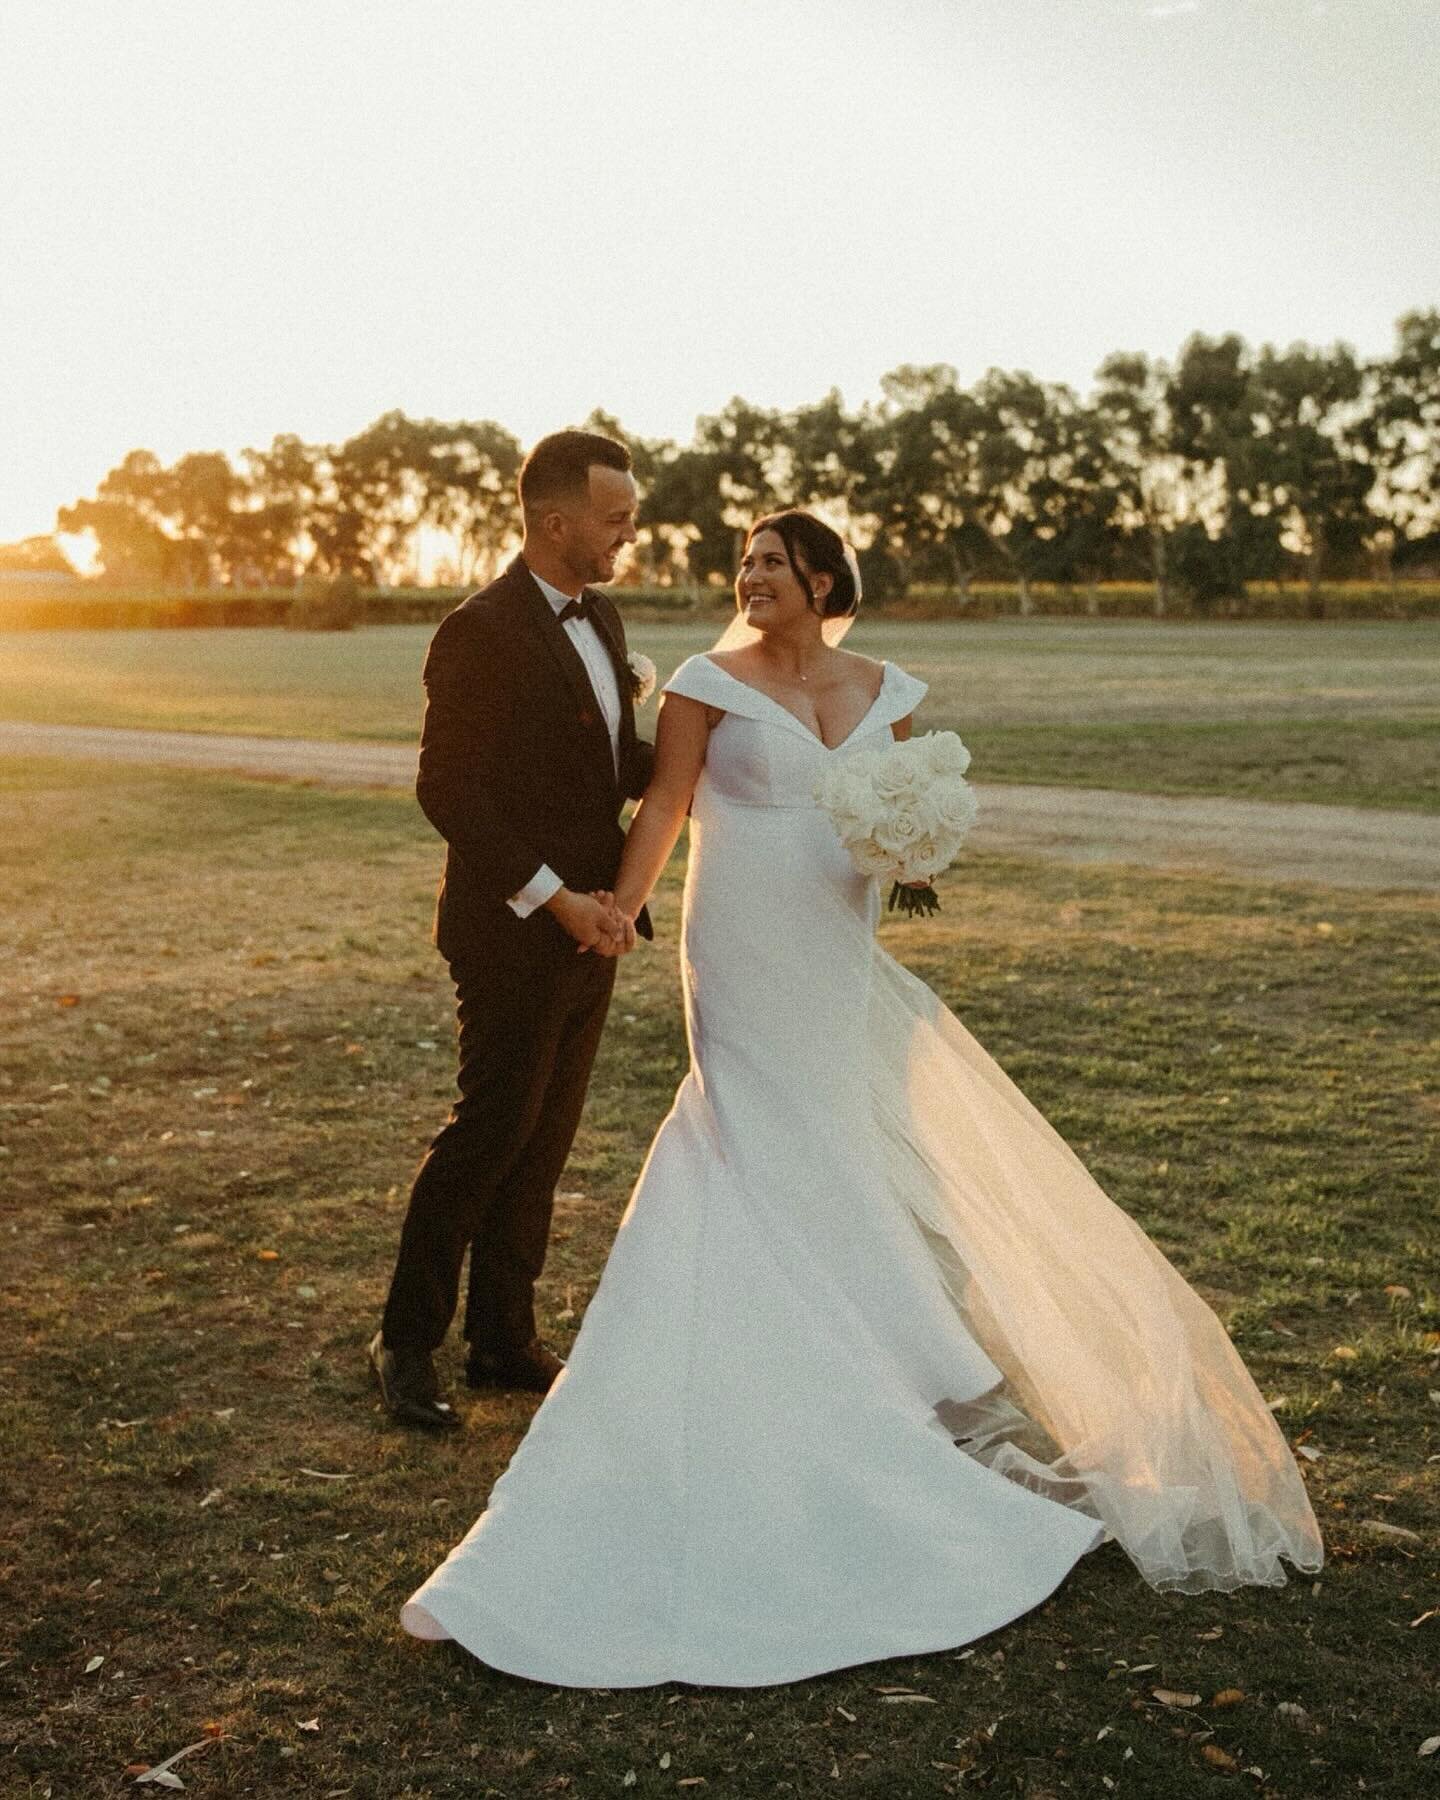 Sunset magic with these two ✨❤️

#weddingphotographer #perthweddingphotographer #perthweddings #waweddings #perthbride #swanvalleywedding #sandalfordwinery